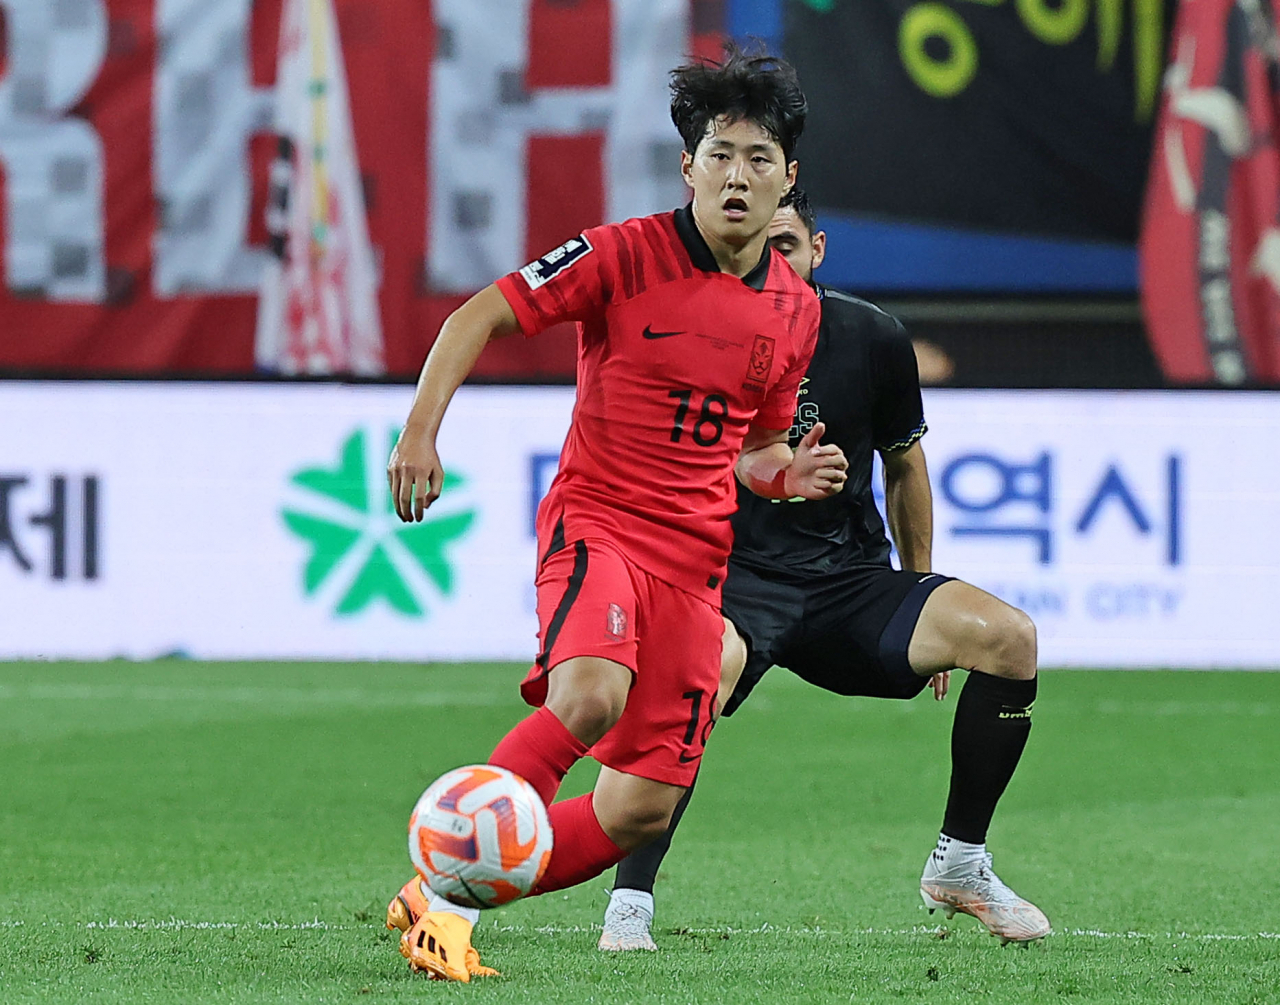 Lee Kang-in of South Korea dribbles the ball in a friendly match against El Salvador at Daejeon World Cup Stadium on June 20. (Yonhap)